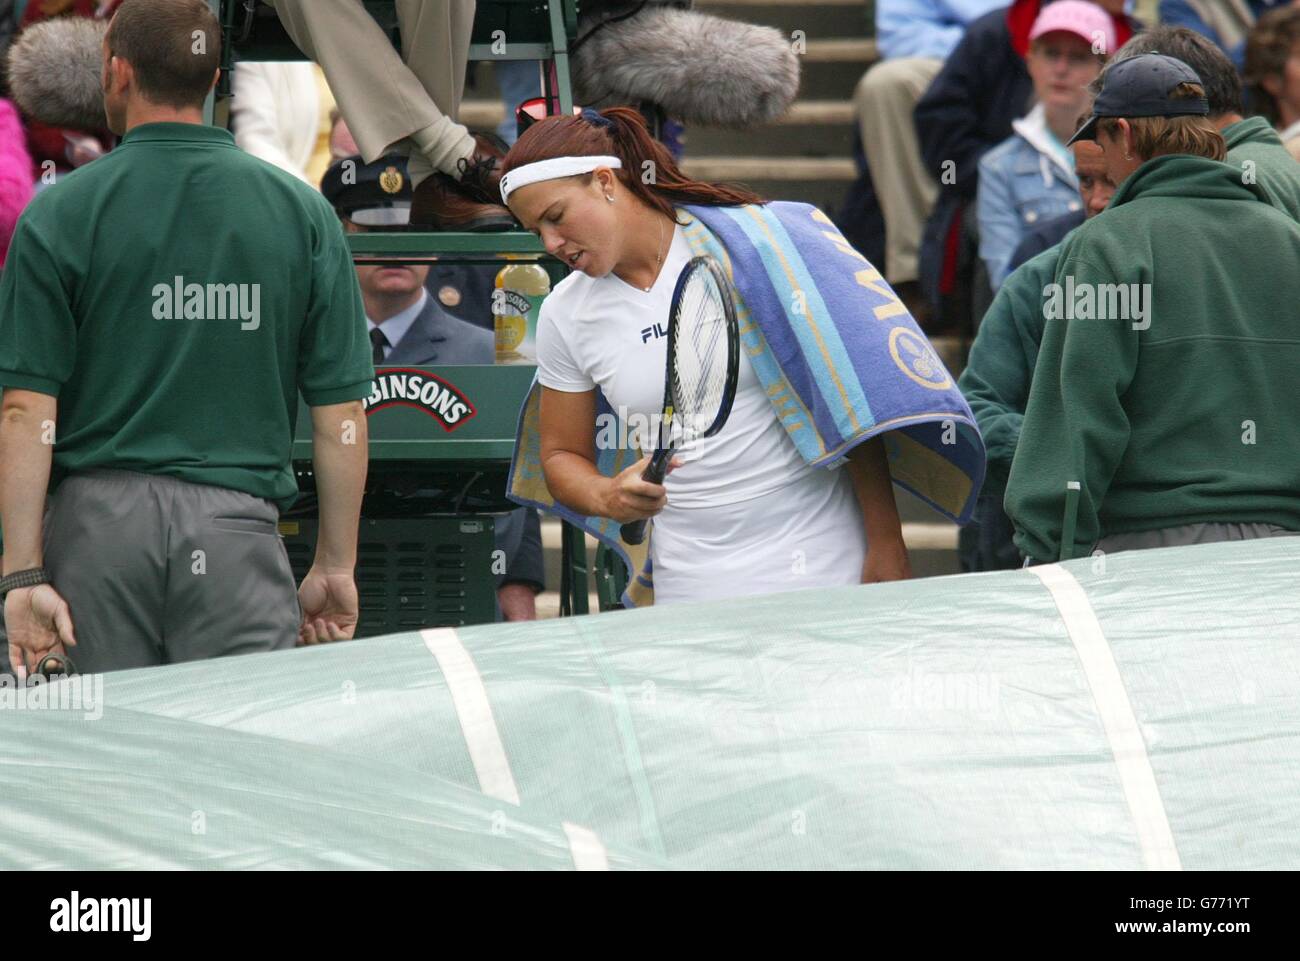 , NO COMMERCIAL USE. Jennifer Capriati, the 3rd seed from the USA leaves the court during a rain break, five games to two down in the first set against Amelie Mauresmo of France, the 9th seed at Wimbledon. Rain interrrupted play on several occasions. Stock Photo